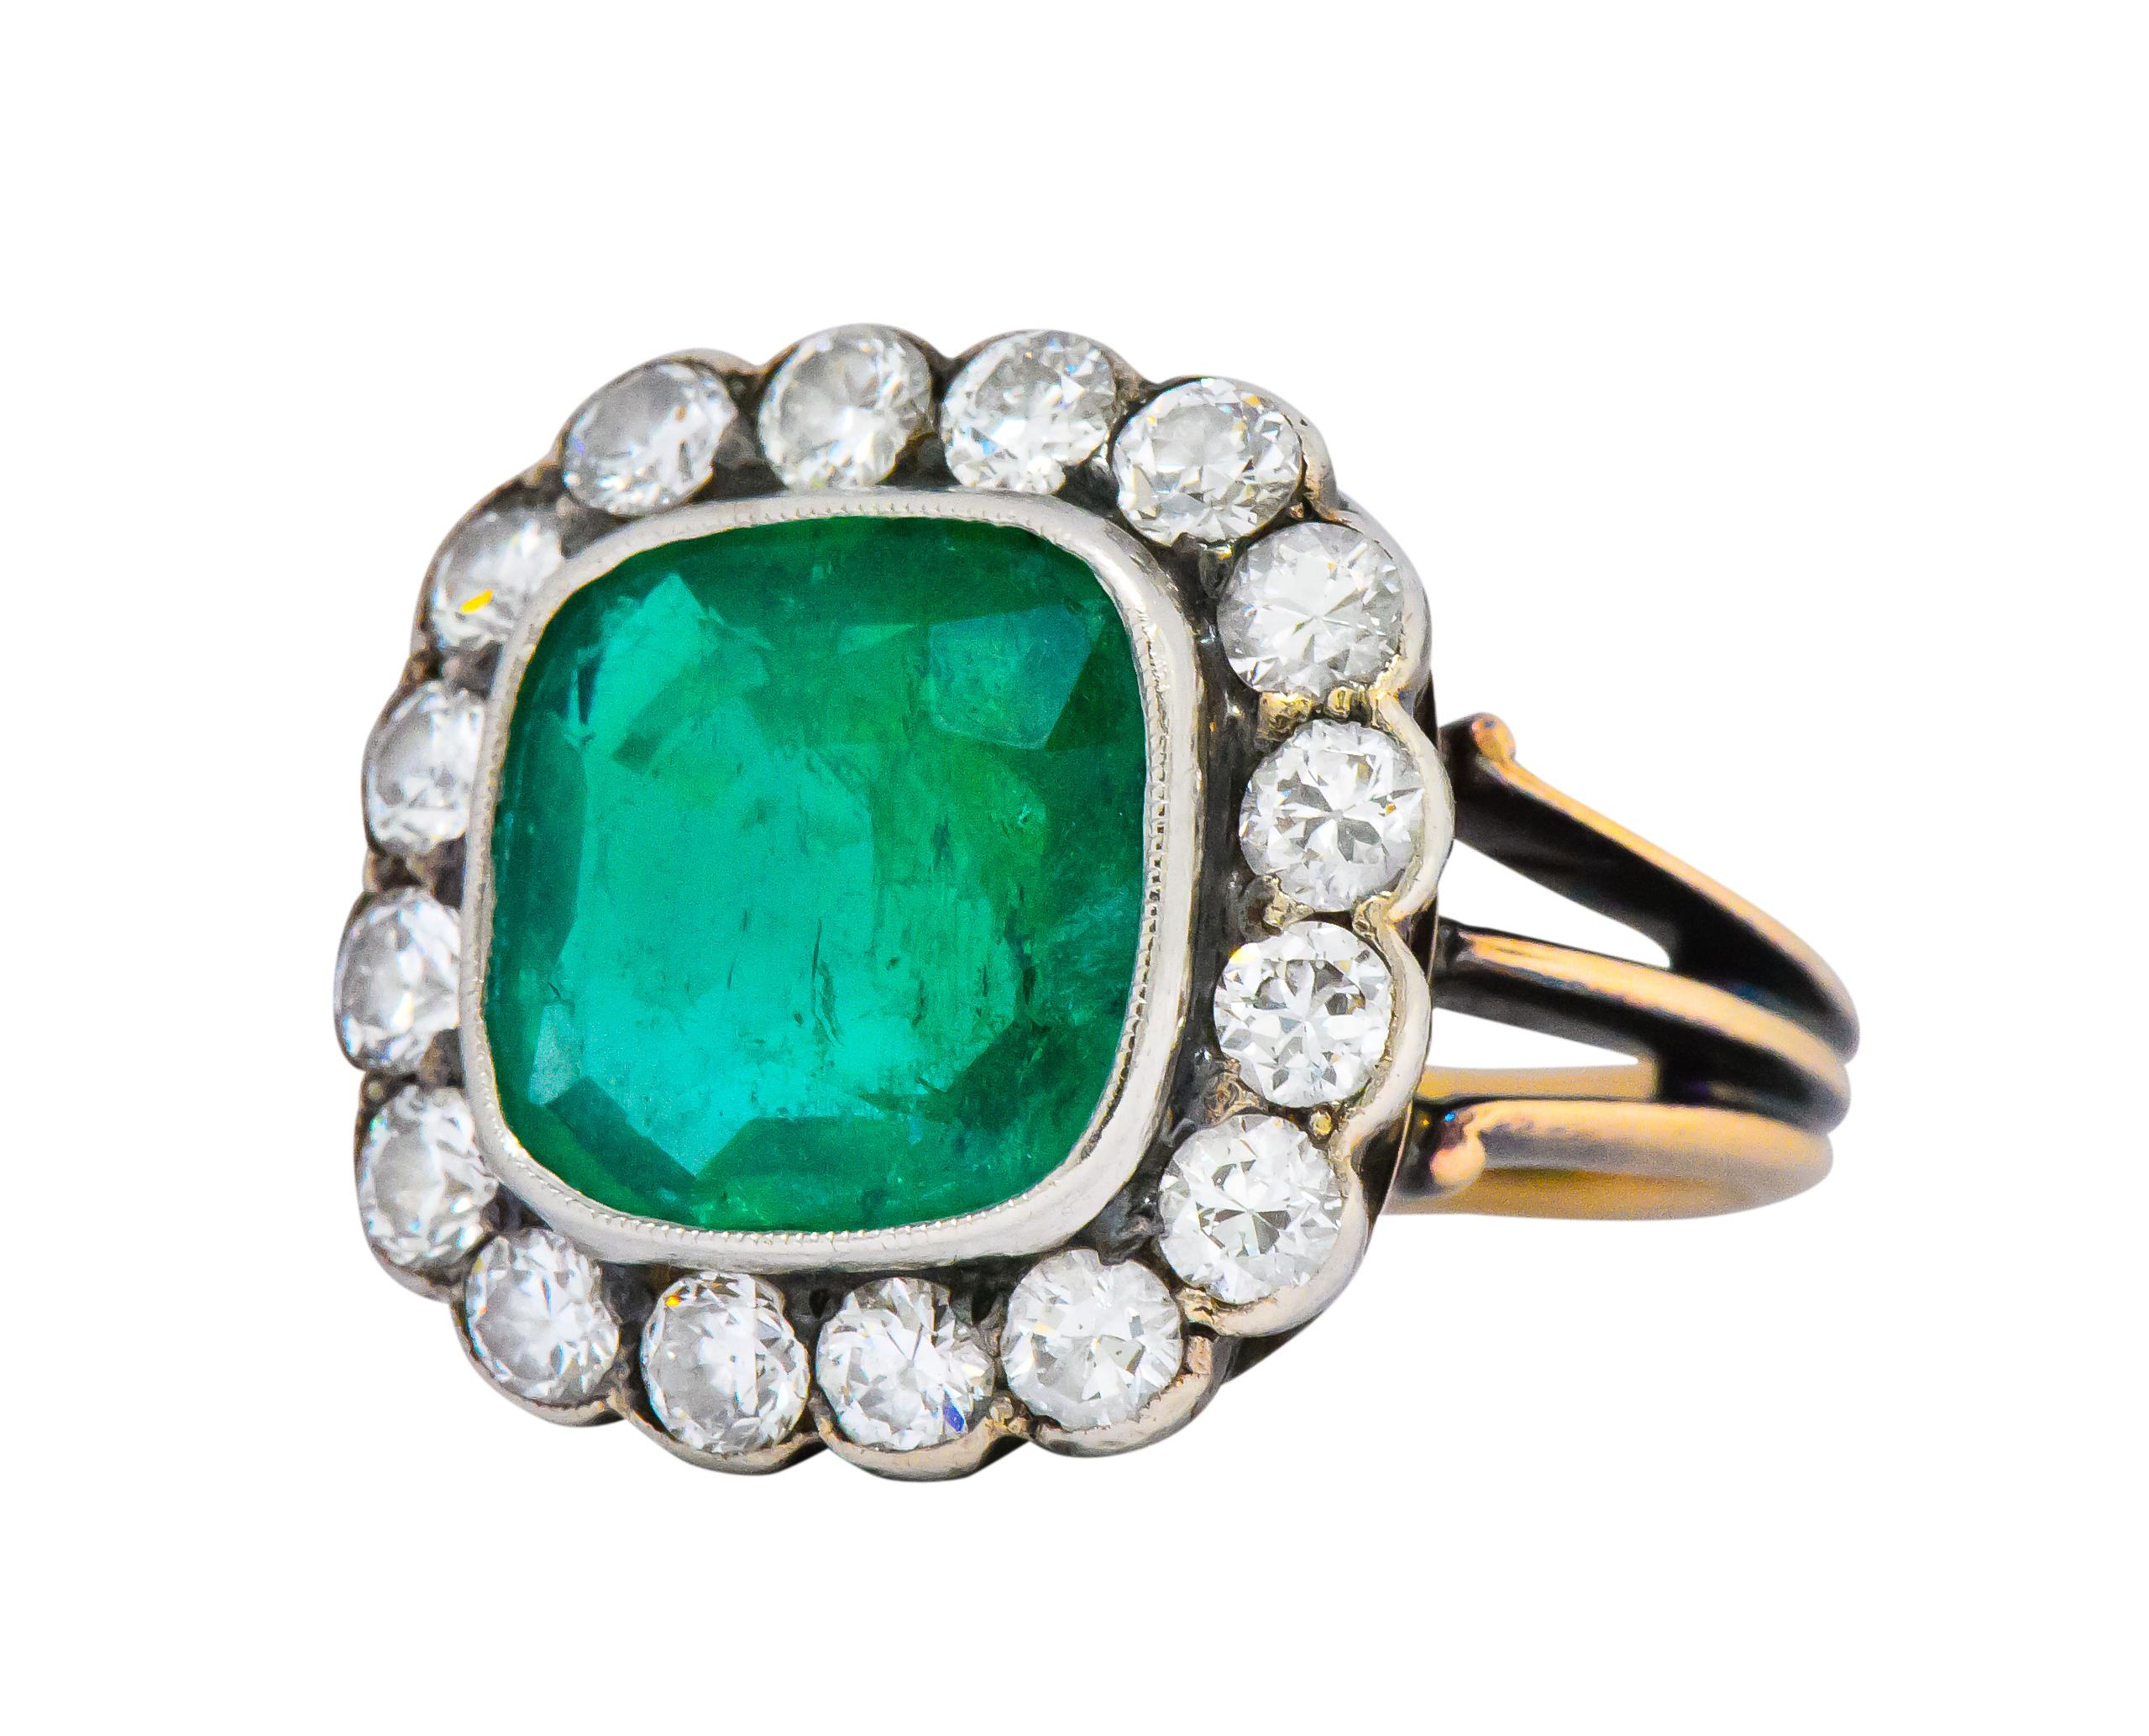 Centering a square cushion cut emerald weighing approximately 3.25 carats, bright vivid green

With an old European cut diamond surround weighing approximately 1.60 carats, GHI color and VS to SI clarity

With a tri-split and grooved shank

Tested